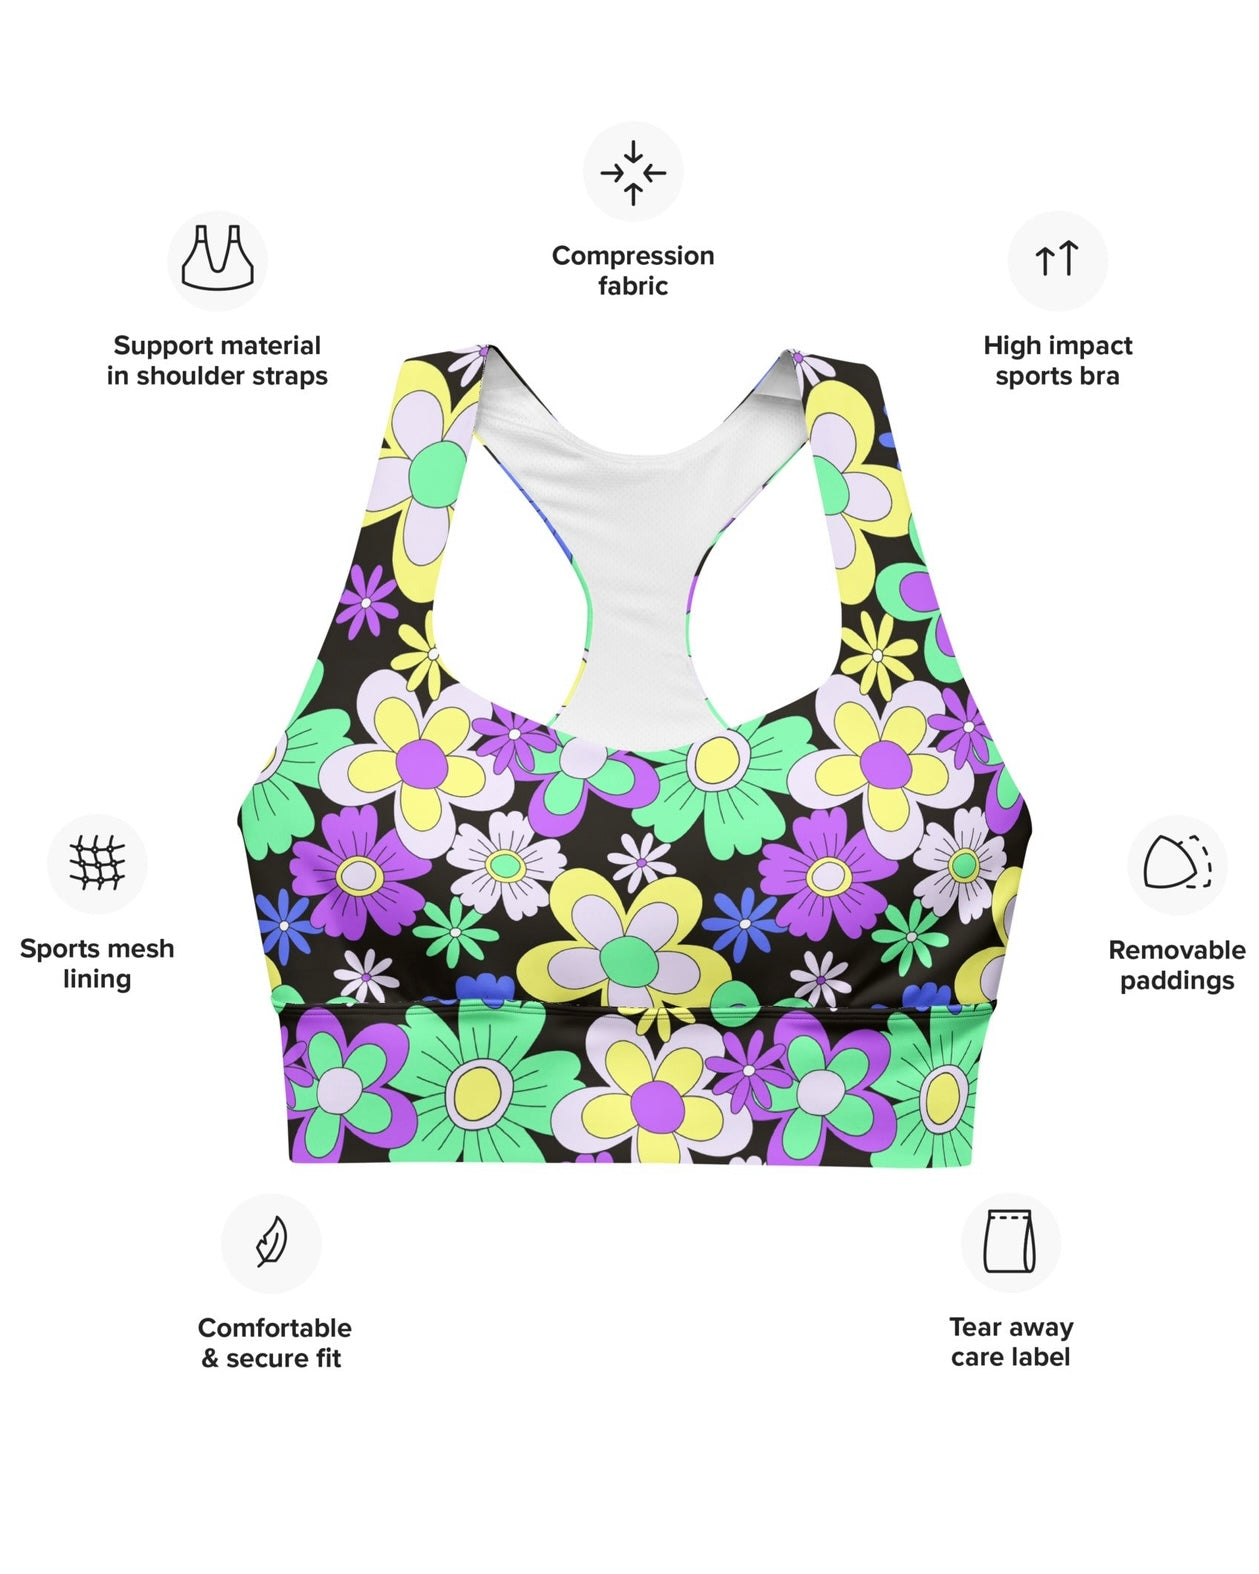 Crazy Daisy Longline Top, Sports Top, - One Stop Rave